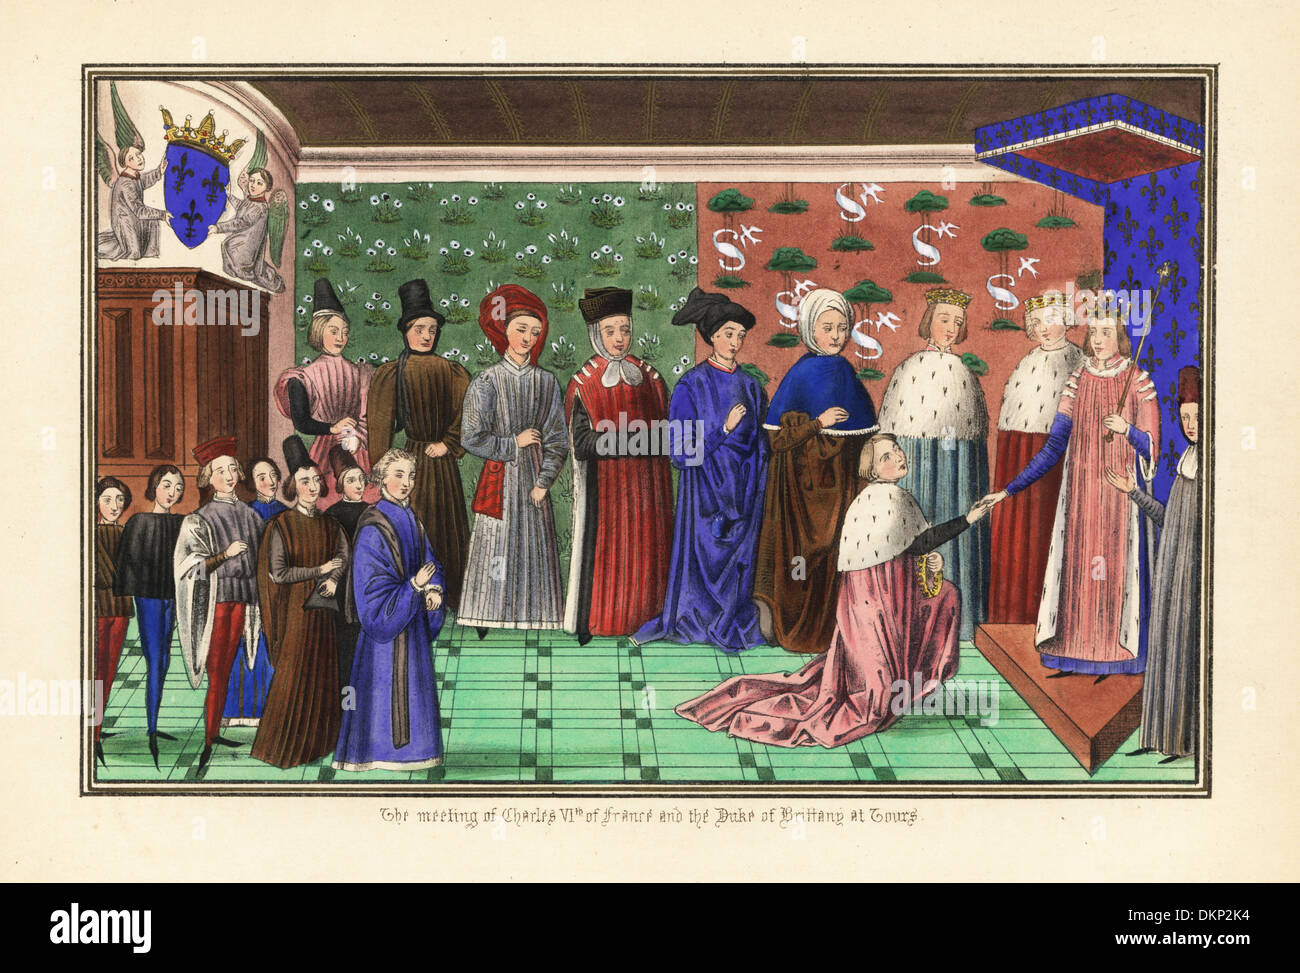 Meeting of King Charles VI and Duke of Brittany, at Tours, c.1396. Stock Photo